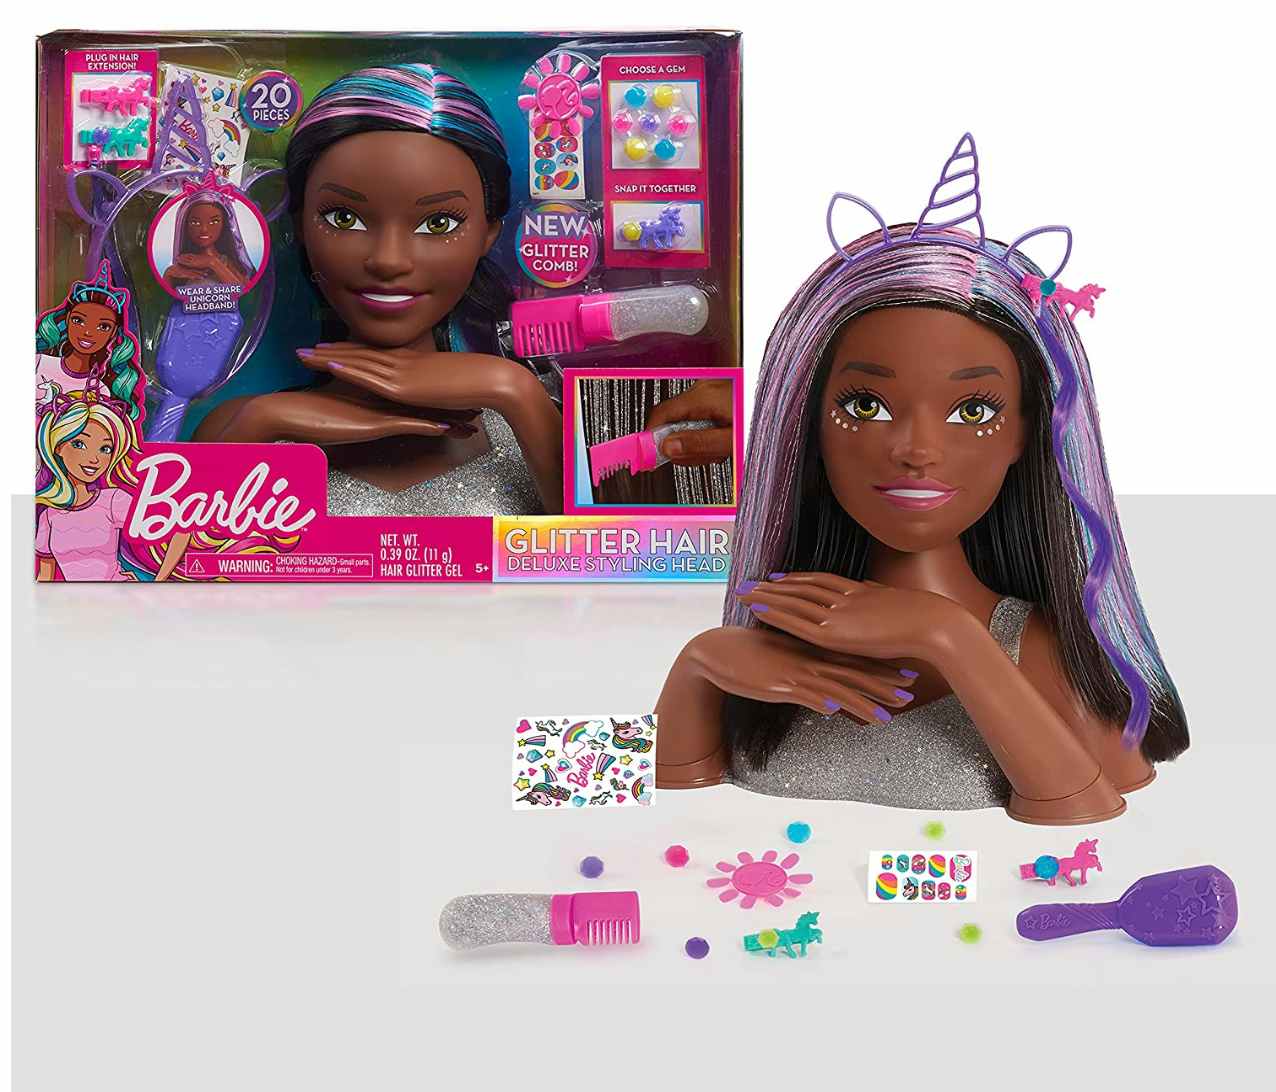 A Barbie styling head on a table with the accessories and packaging